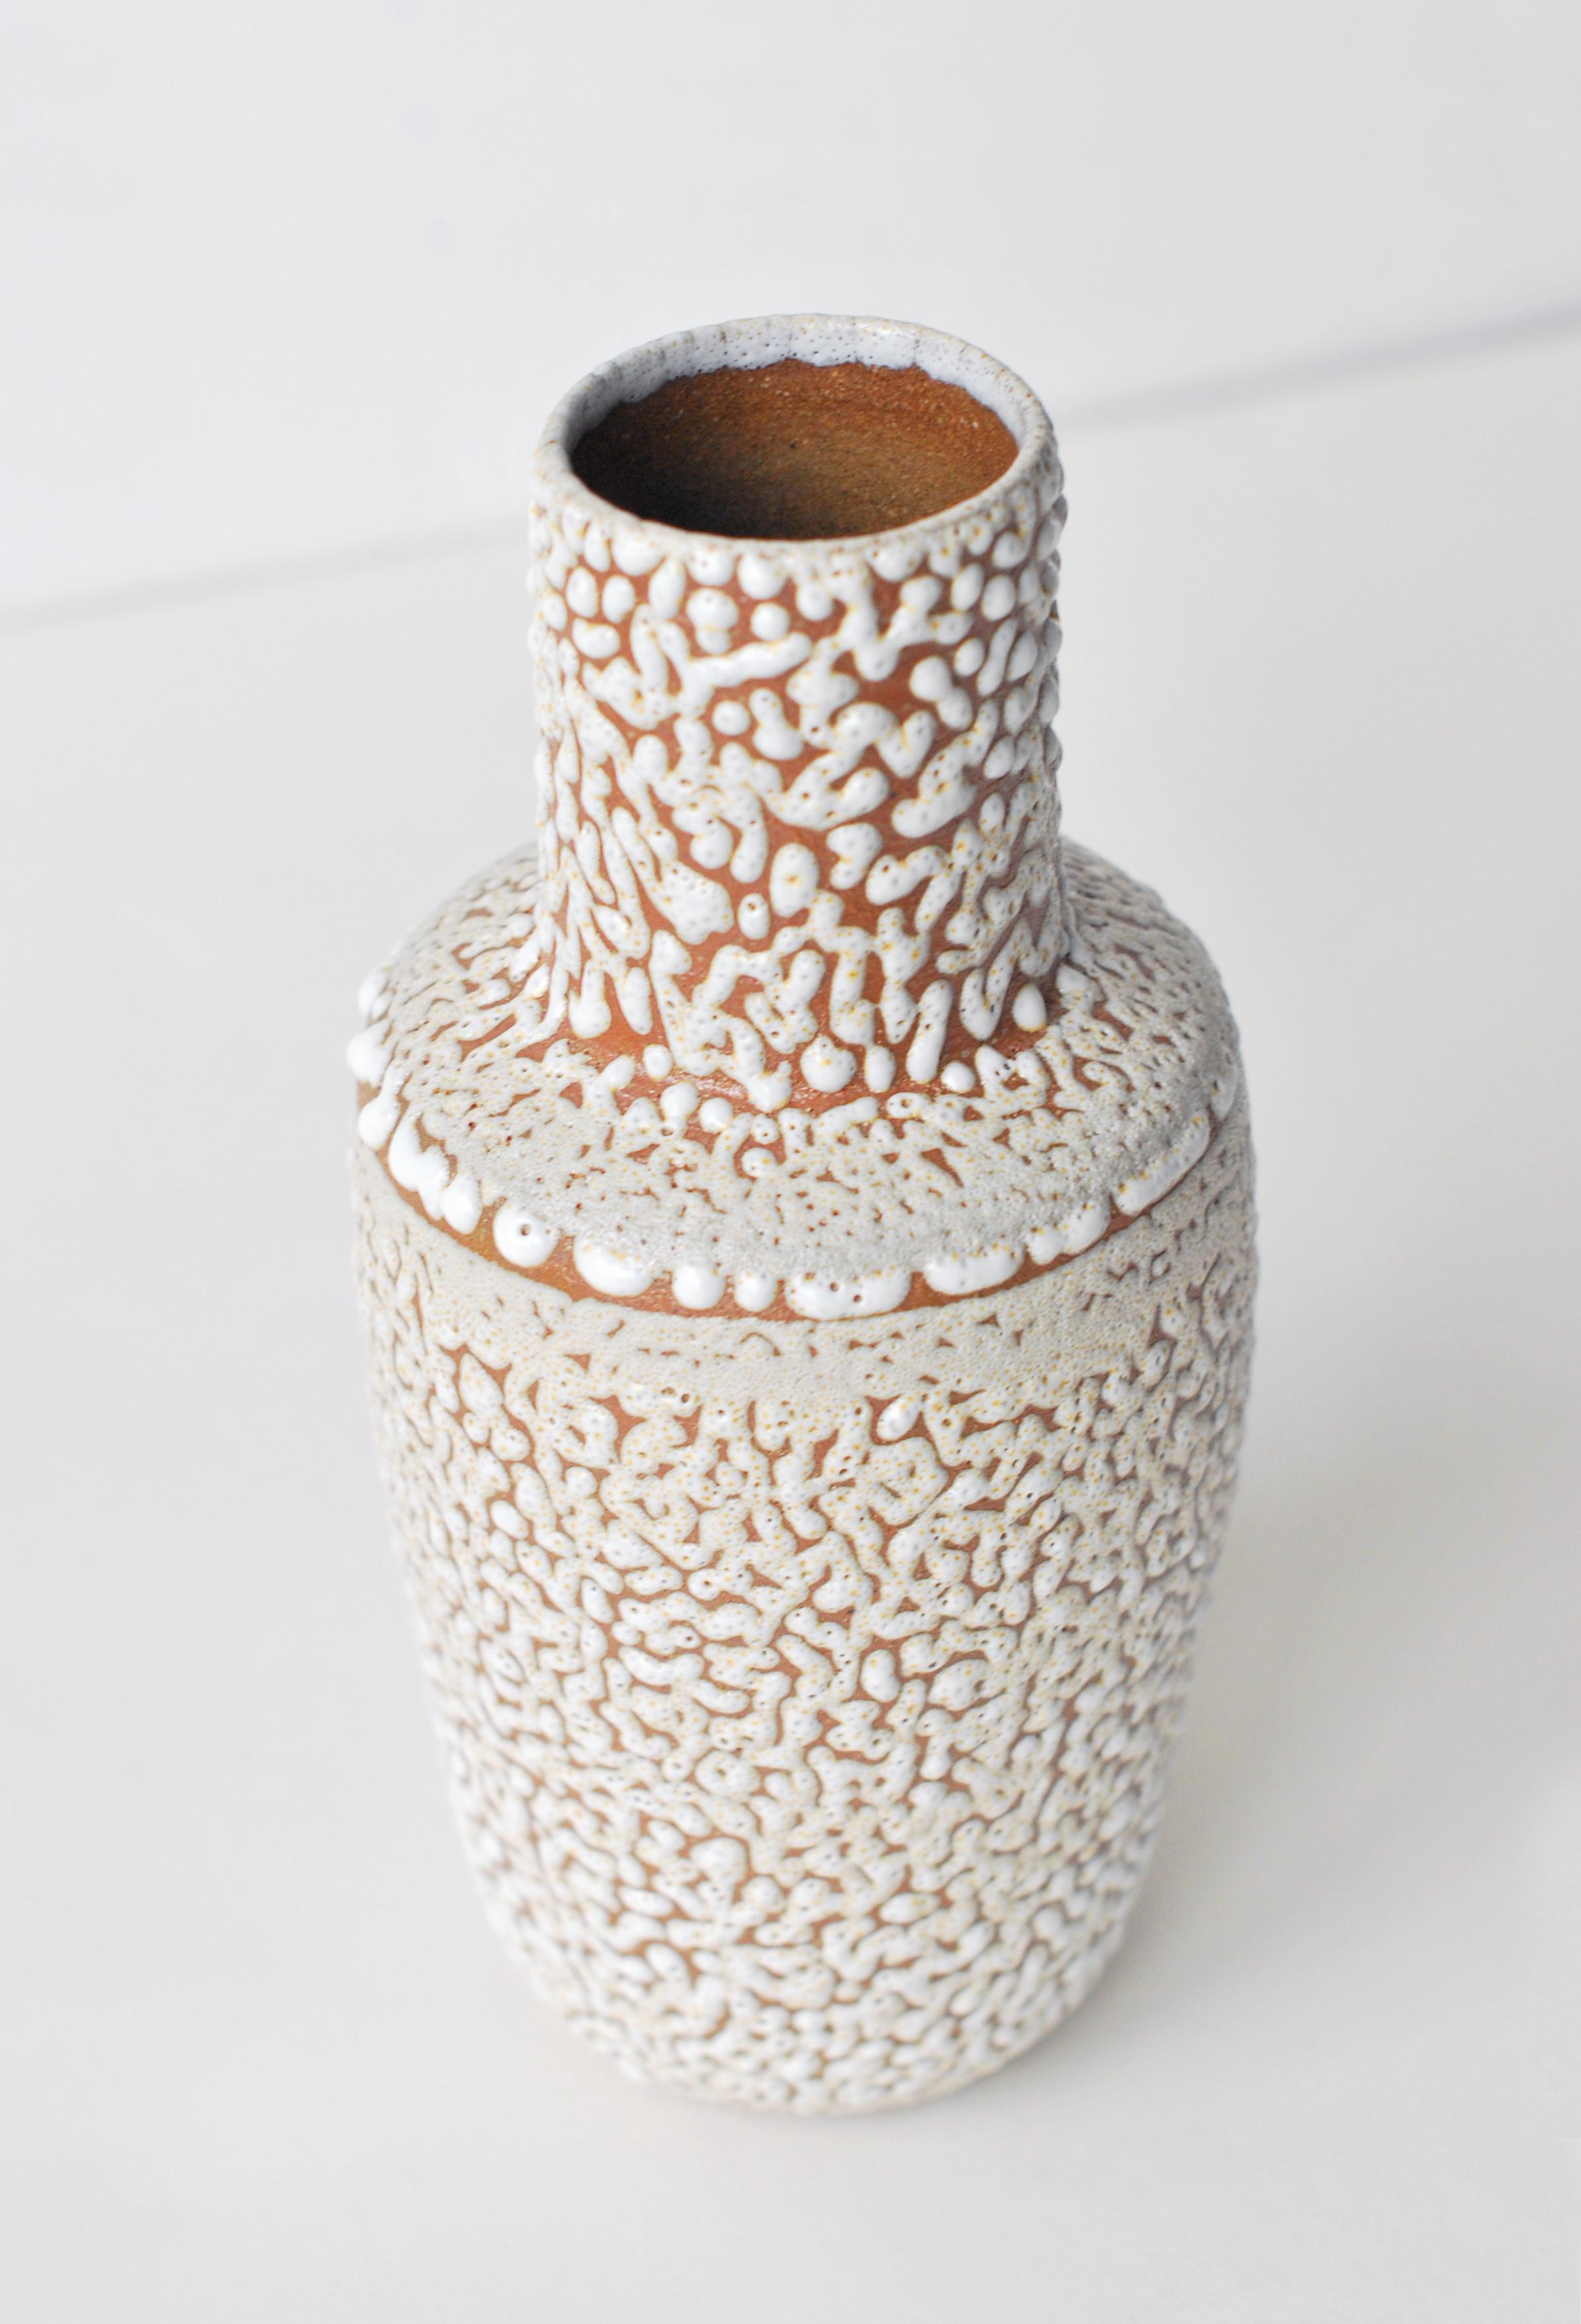 White stoneware vase by Moïo Studio
Dimensions: 17 x 7 x 7 cm
Materials: White crawl glaze on tan stoneware

Is the Berlin-based ceramic art studio of French-Palestinian artist Maia Beyrouti. It was created in 2016 as a result of the desire to